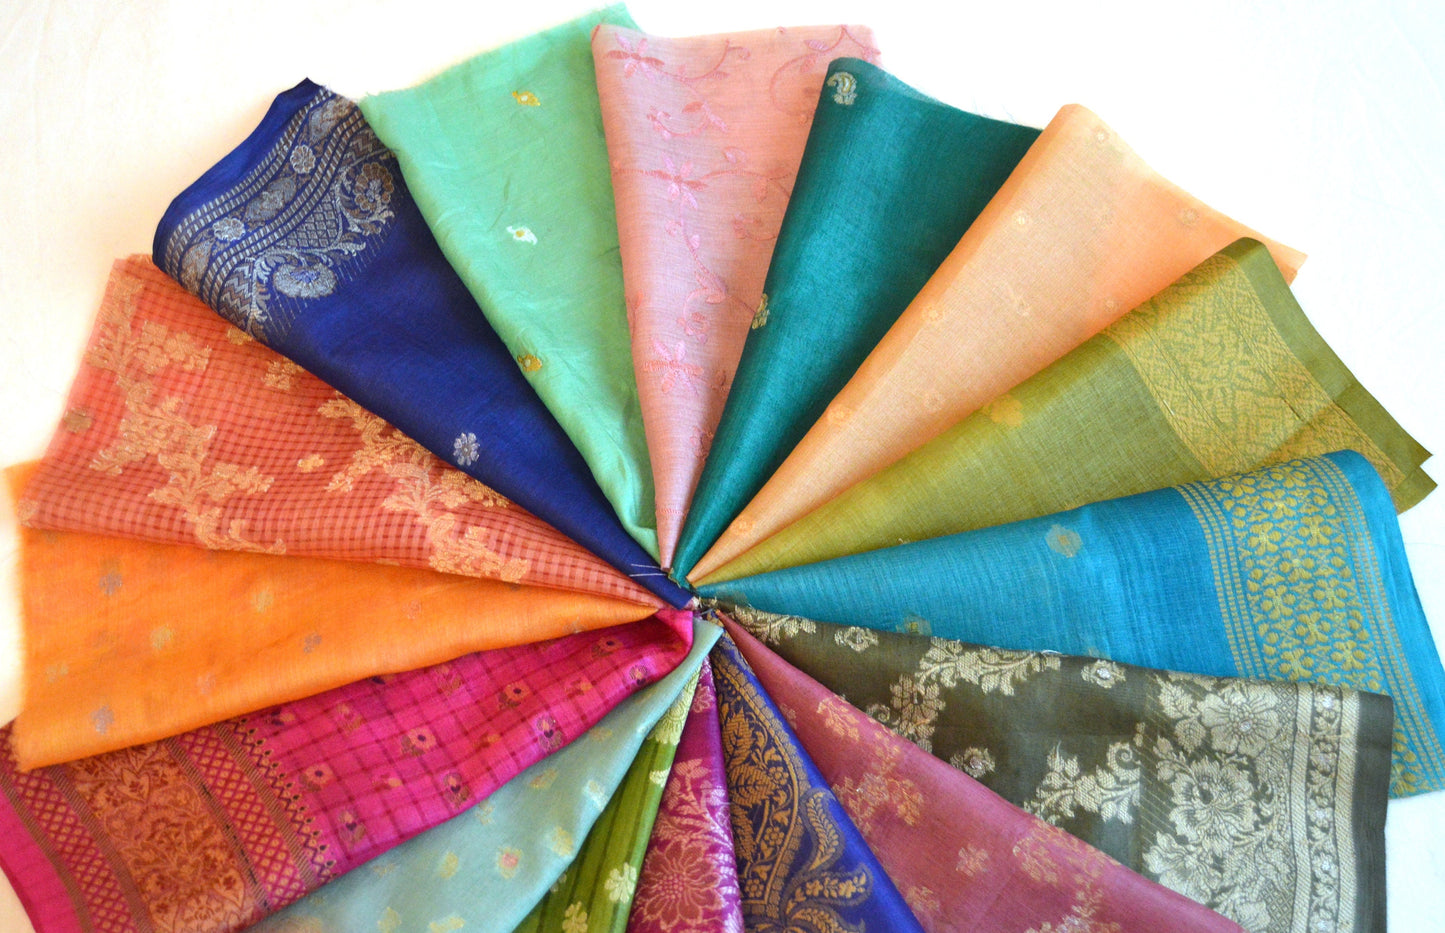 10 Inch x 16 Pieces Mixed Colour Upcycled Sari Silk Craft Fabric Card Making Collage Mixed Media Textile Art Sewing Junk Journals